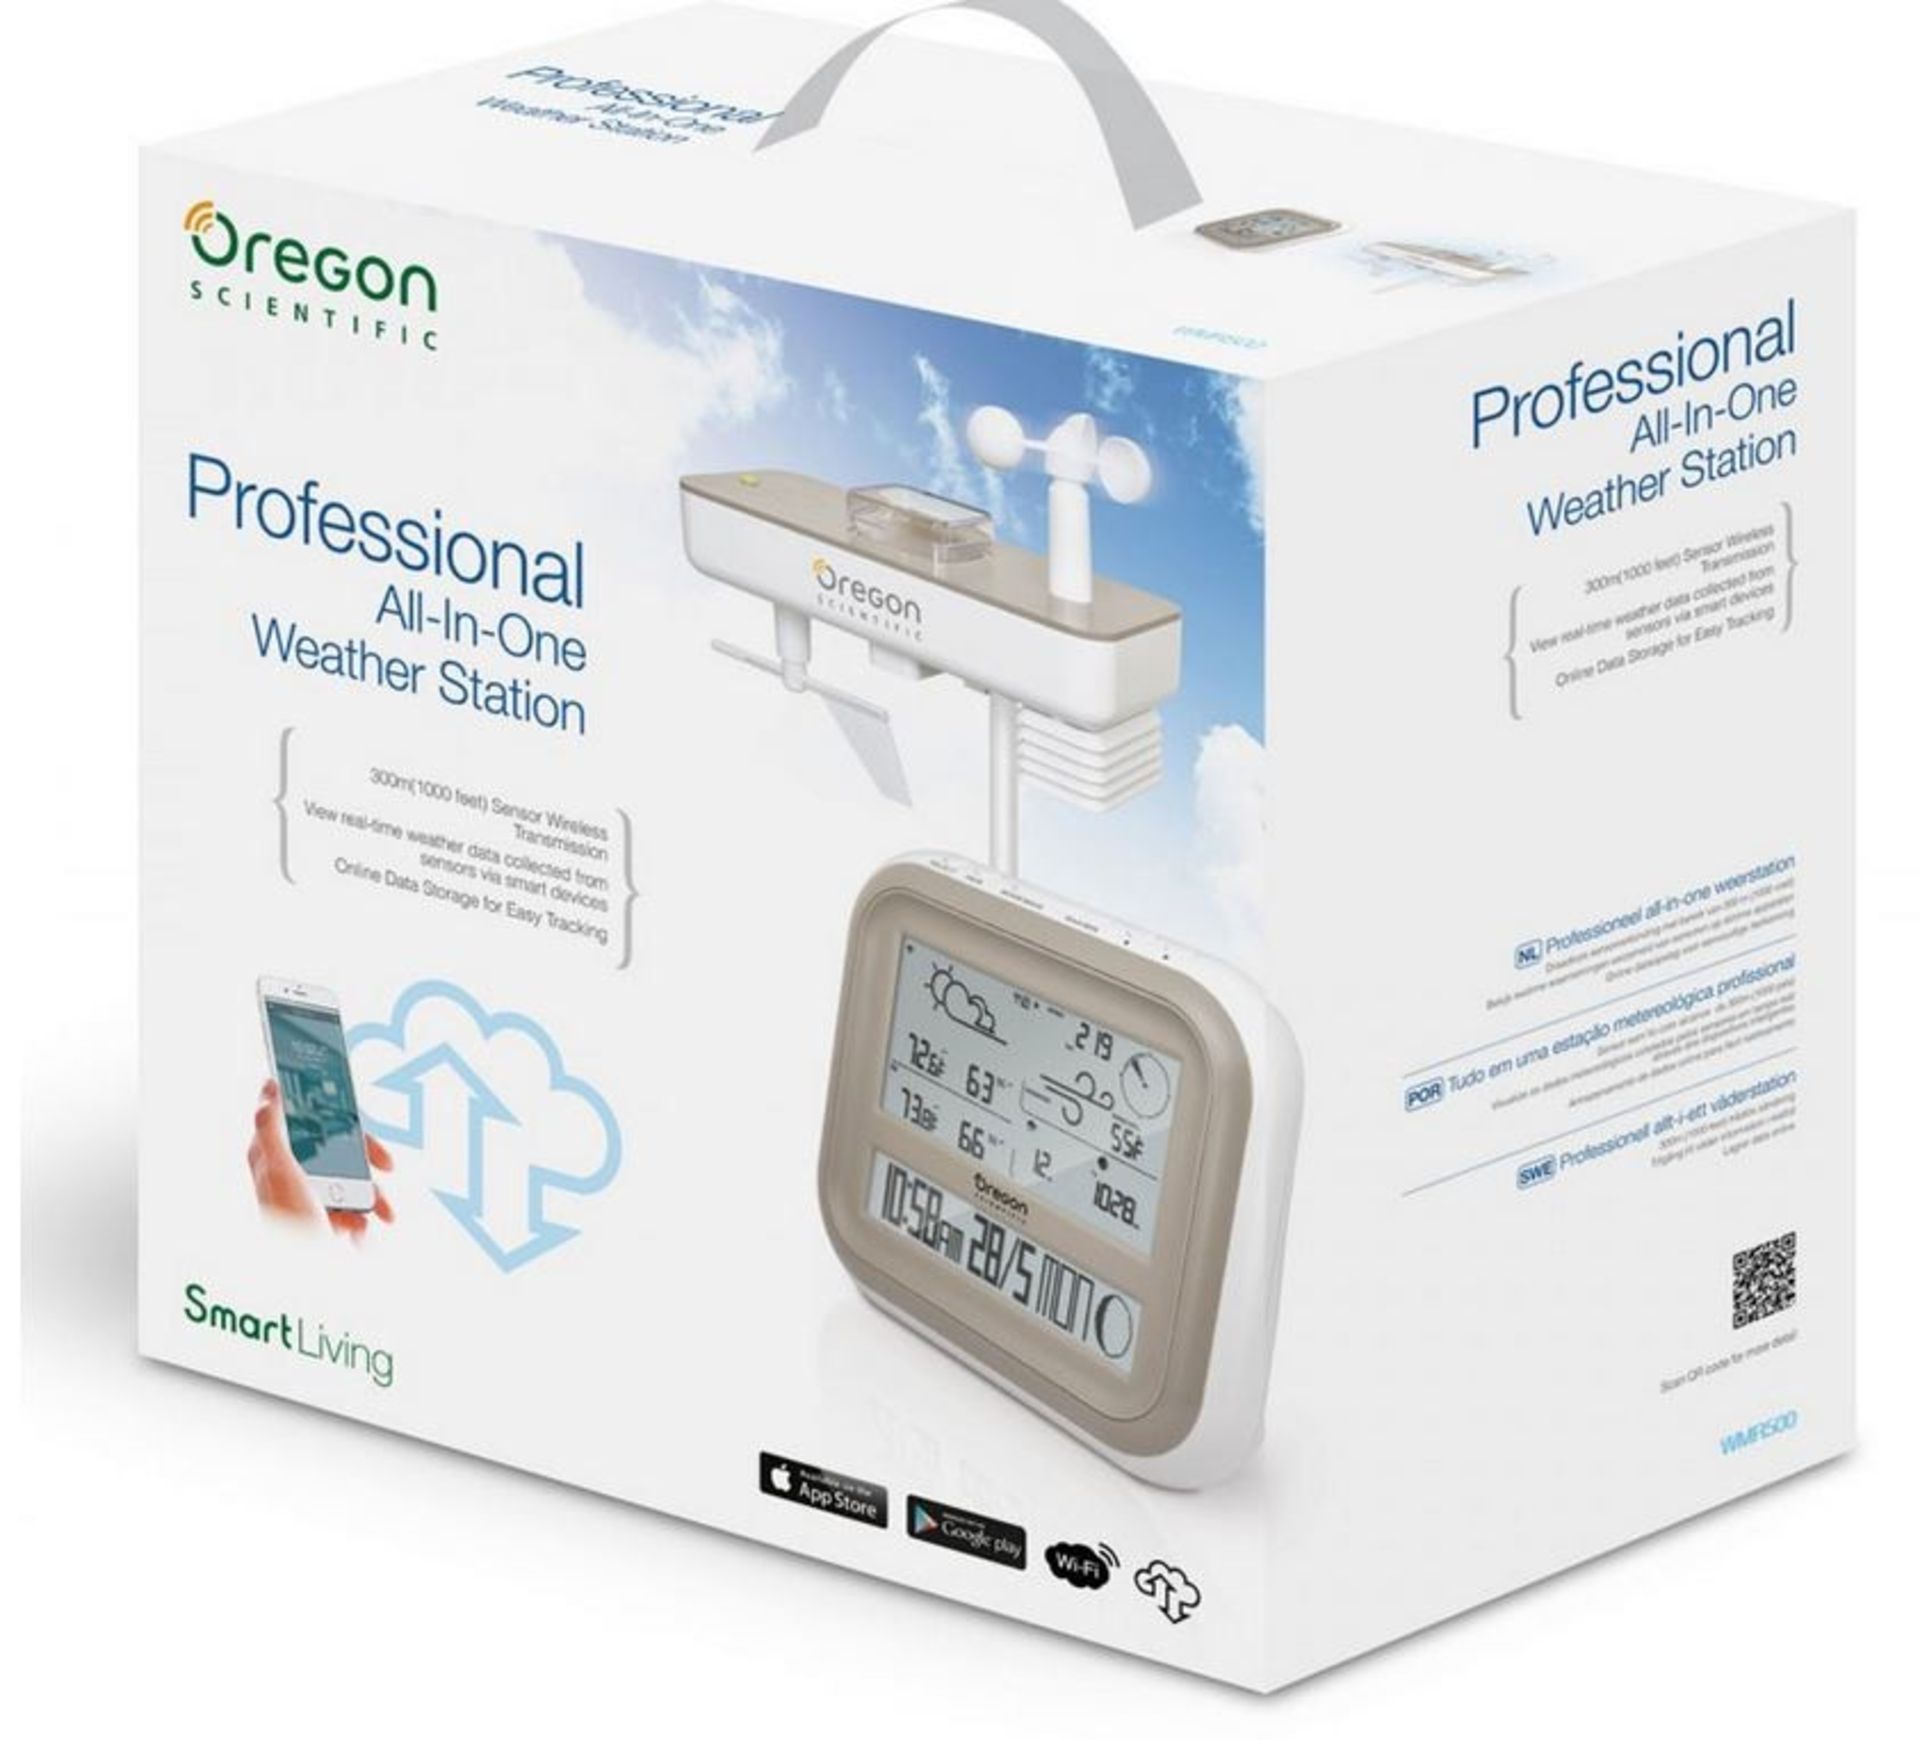 TRADE LOT 10 X BRAND NEW OREGON SCIENTIFIC PROFESSIONAL ALL IN ONE WEATHER STATION WITH 1000 FT